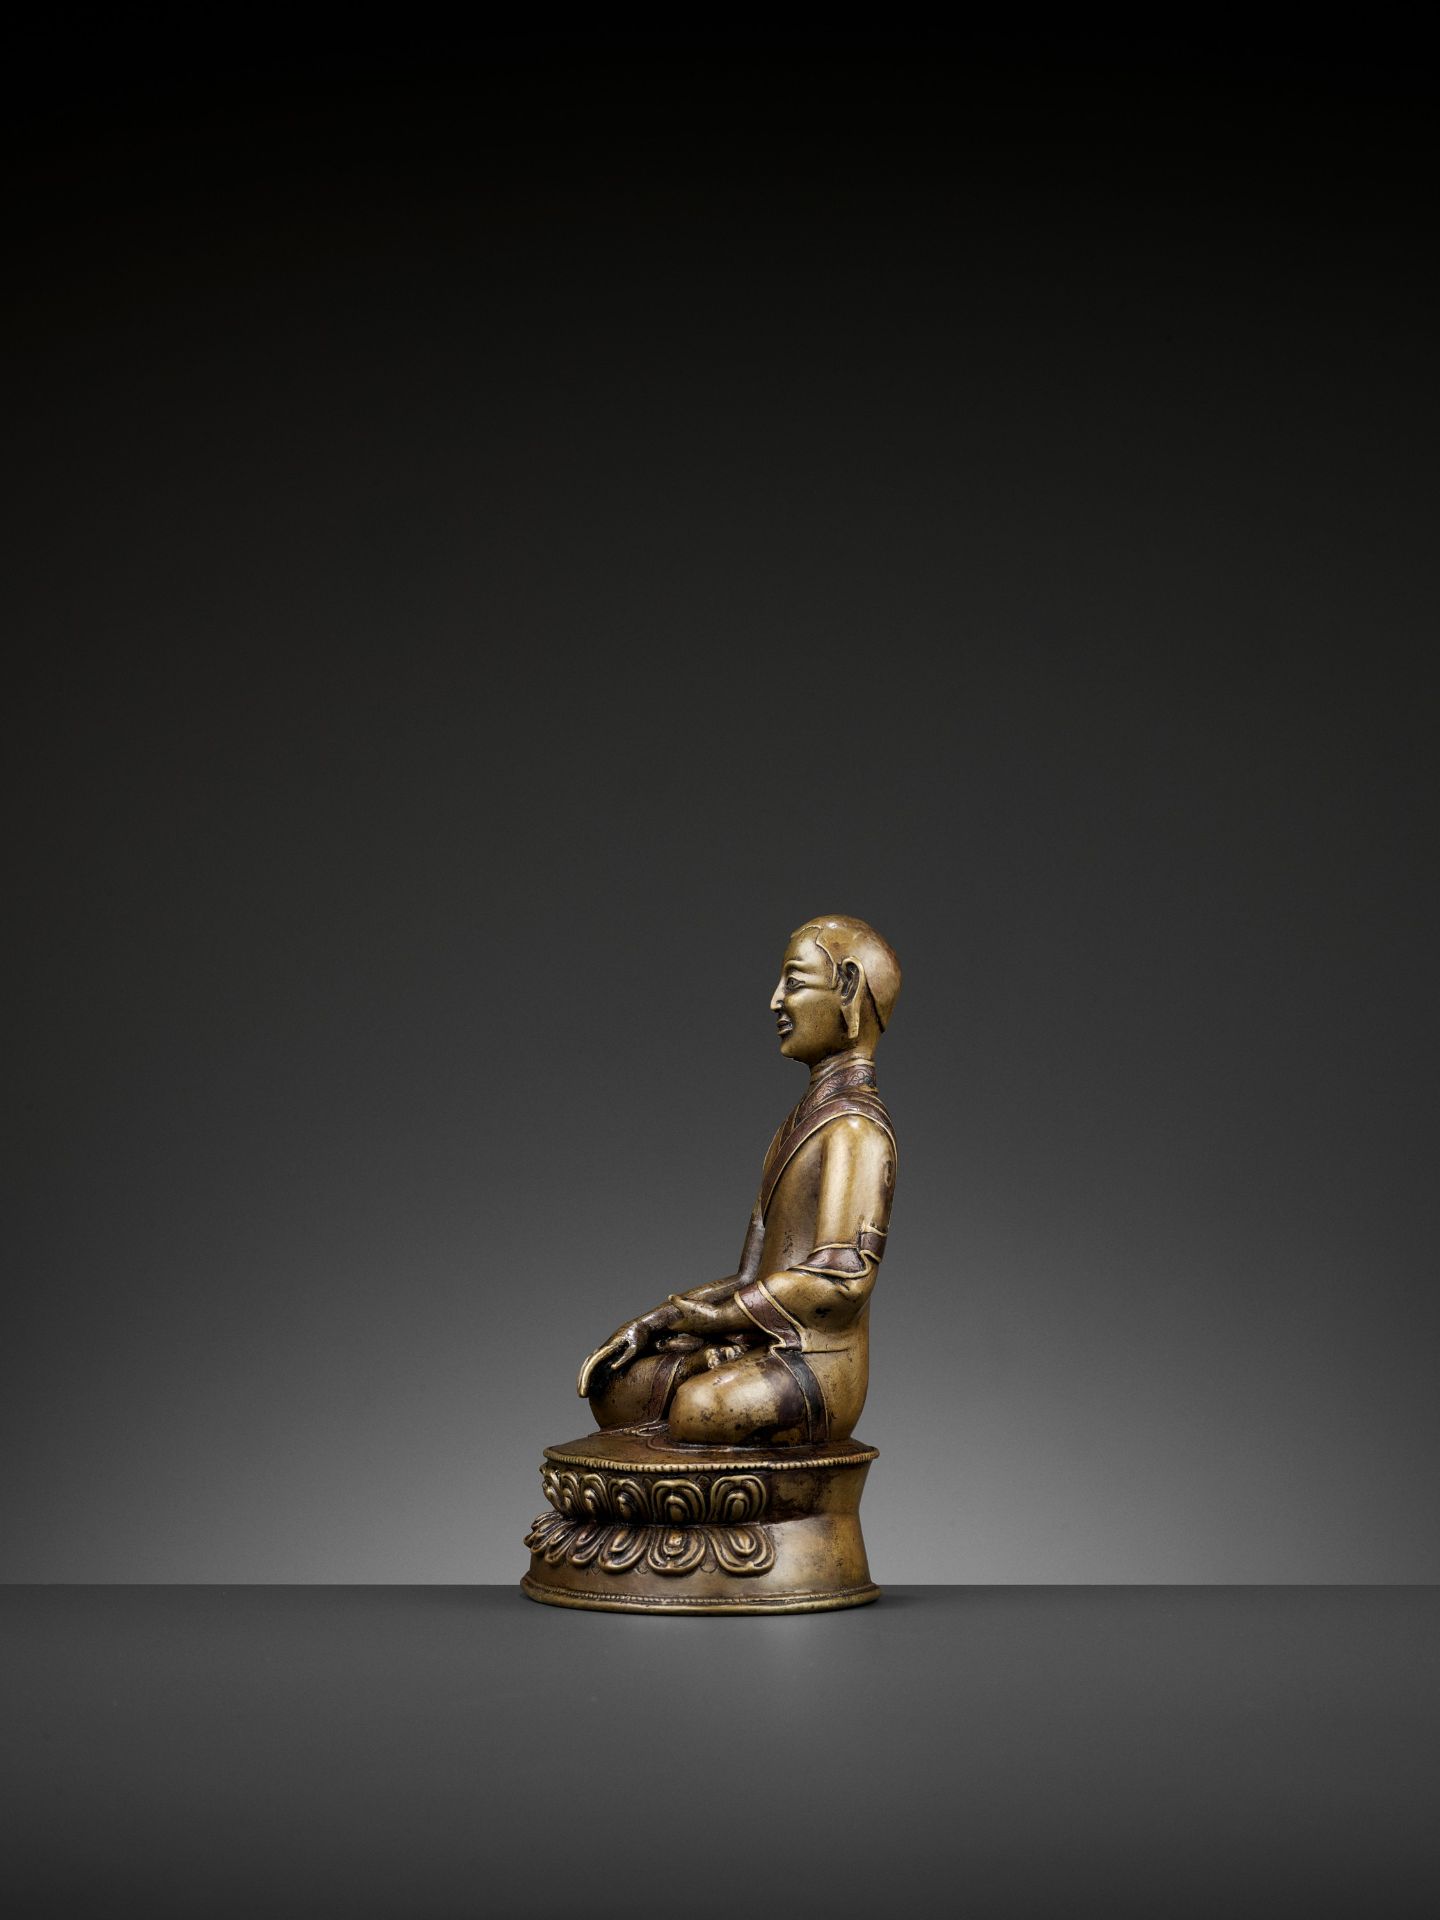 A PORTRAIT BRONZE OF A MONK, COPPER- AND SILVER-INLAID, 16TH-18TH CENTURY - Image 7 of 12